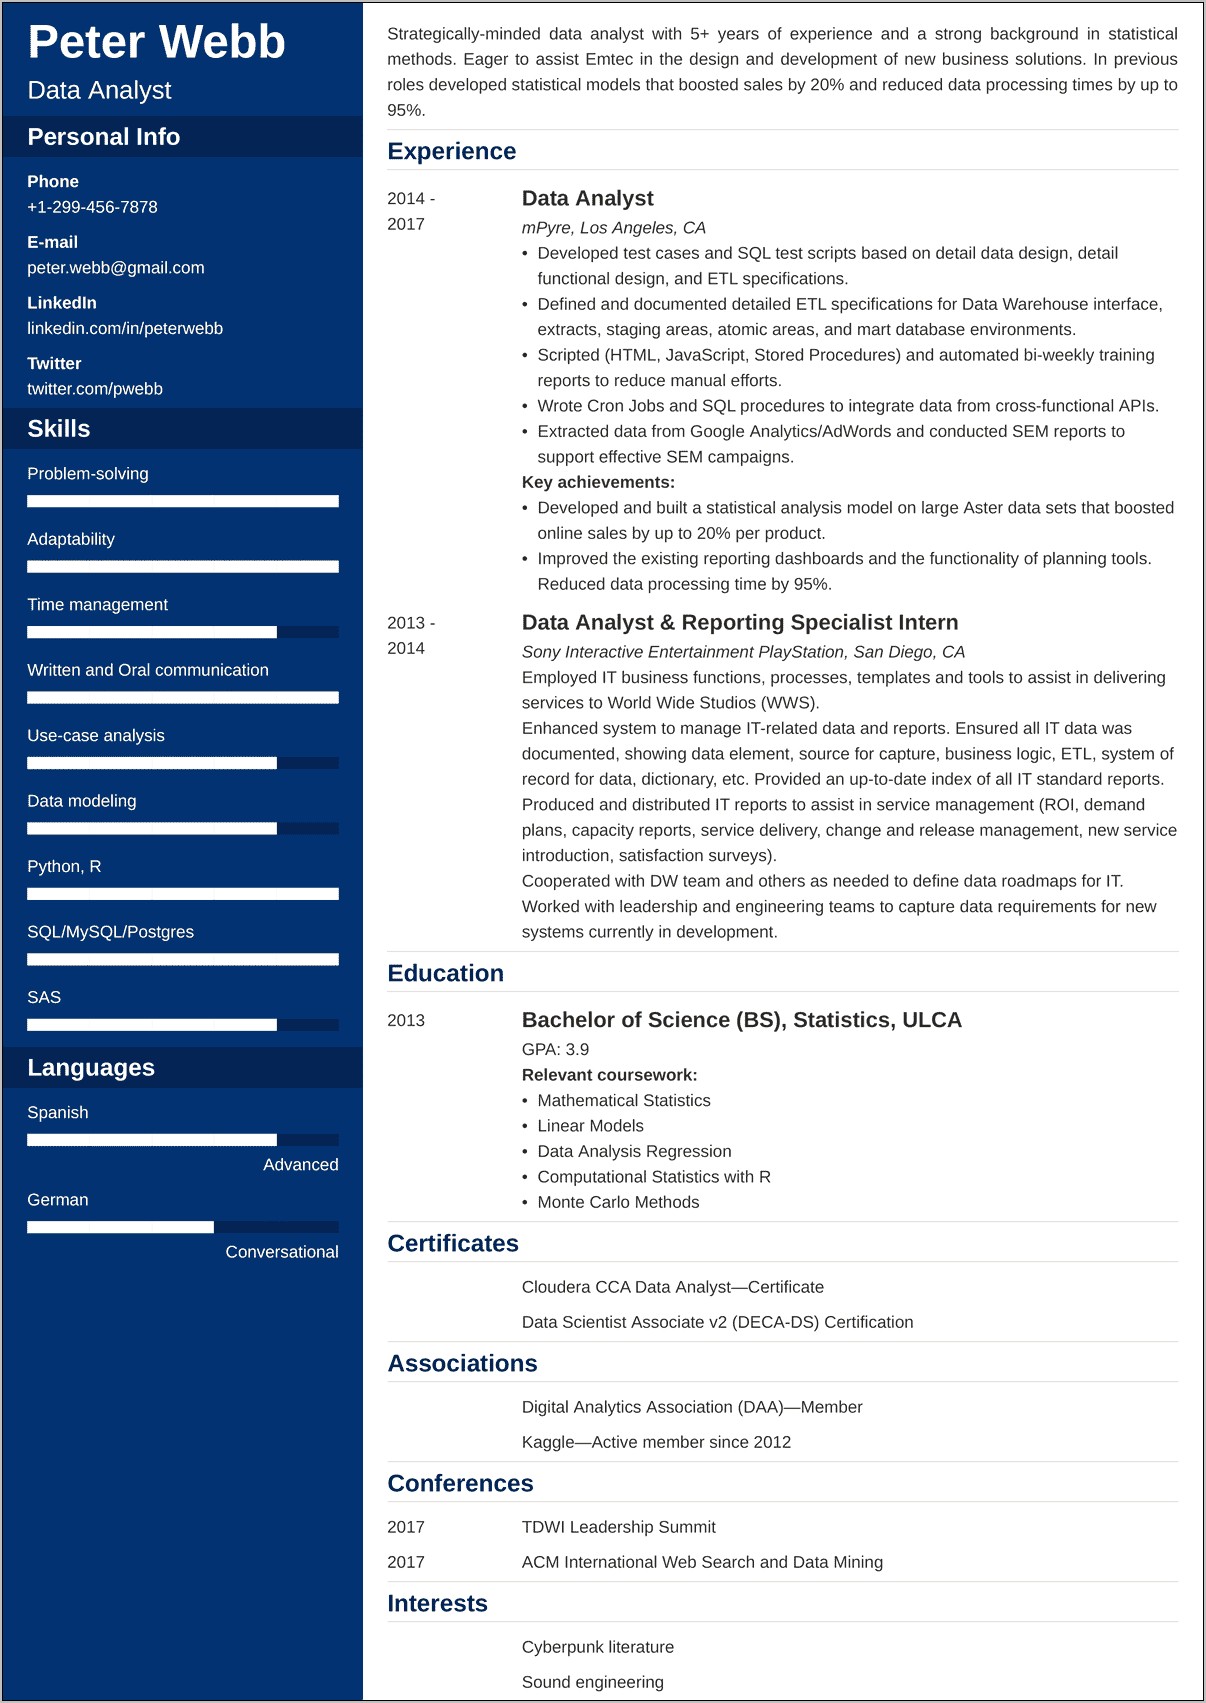 Examples Of Active Language Objectives For Resumes